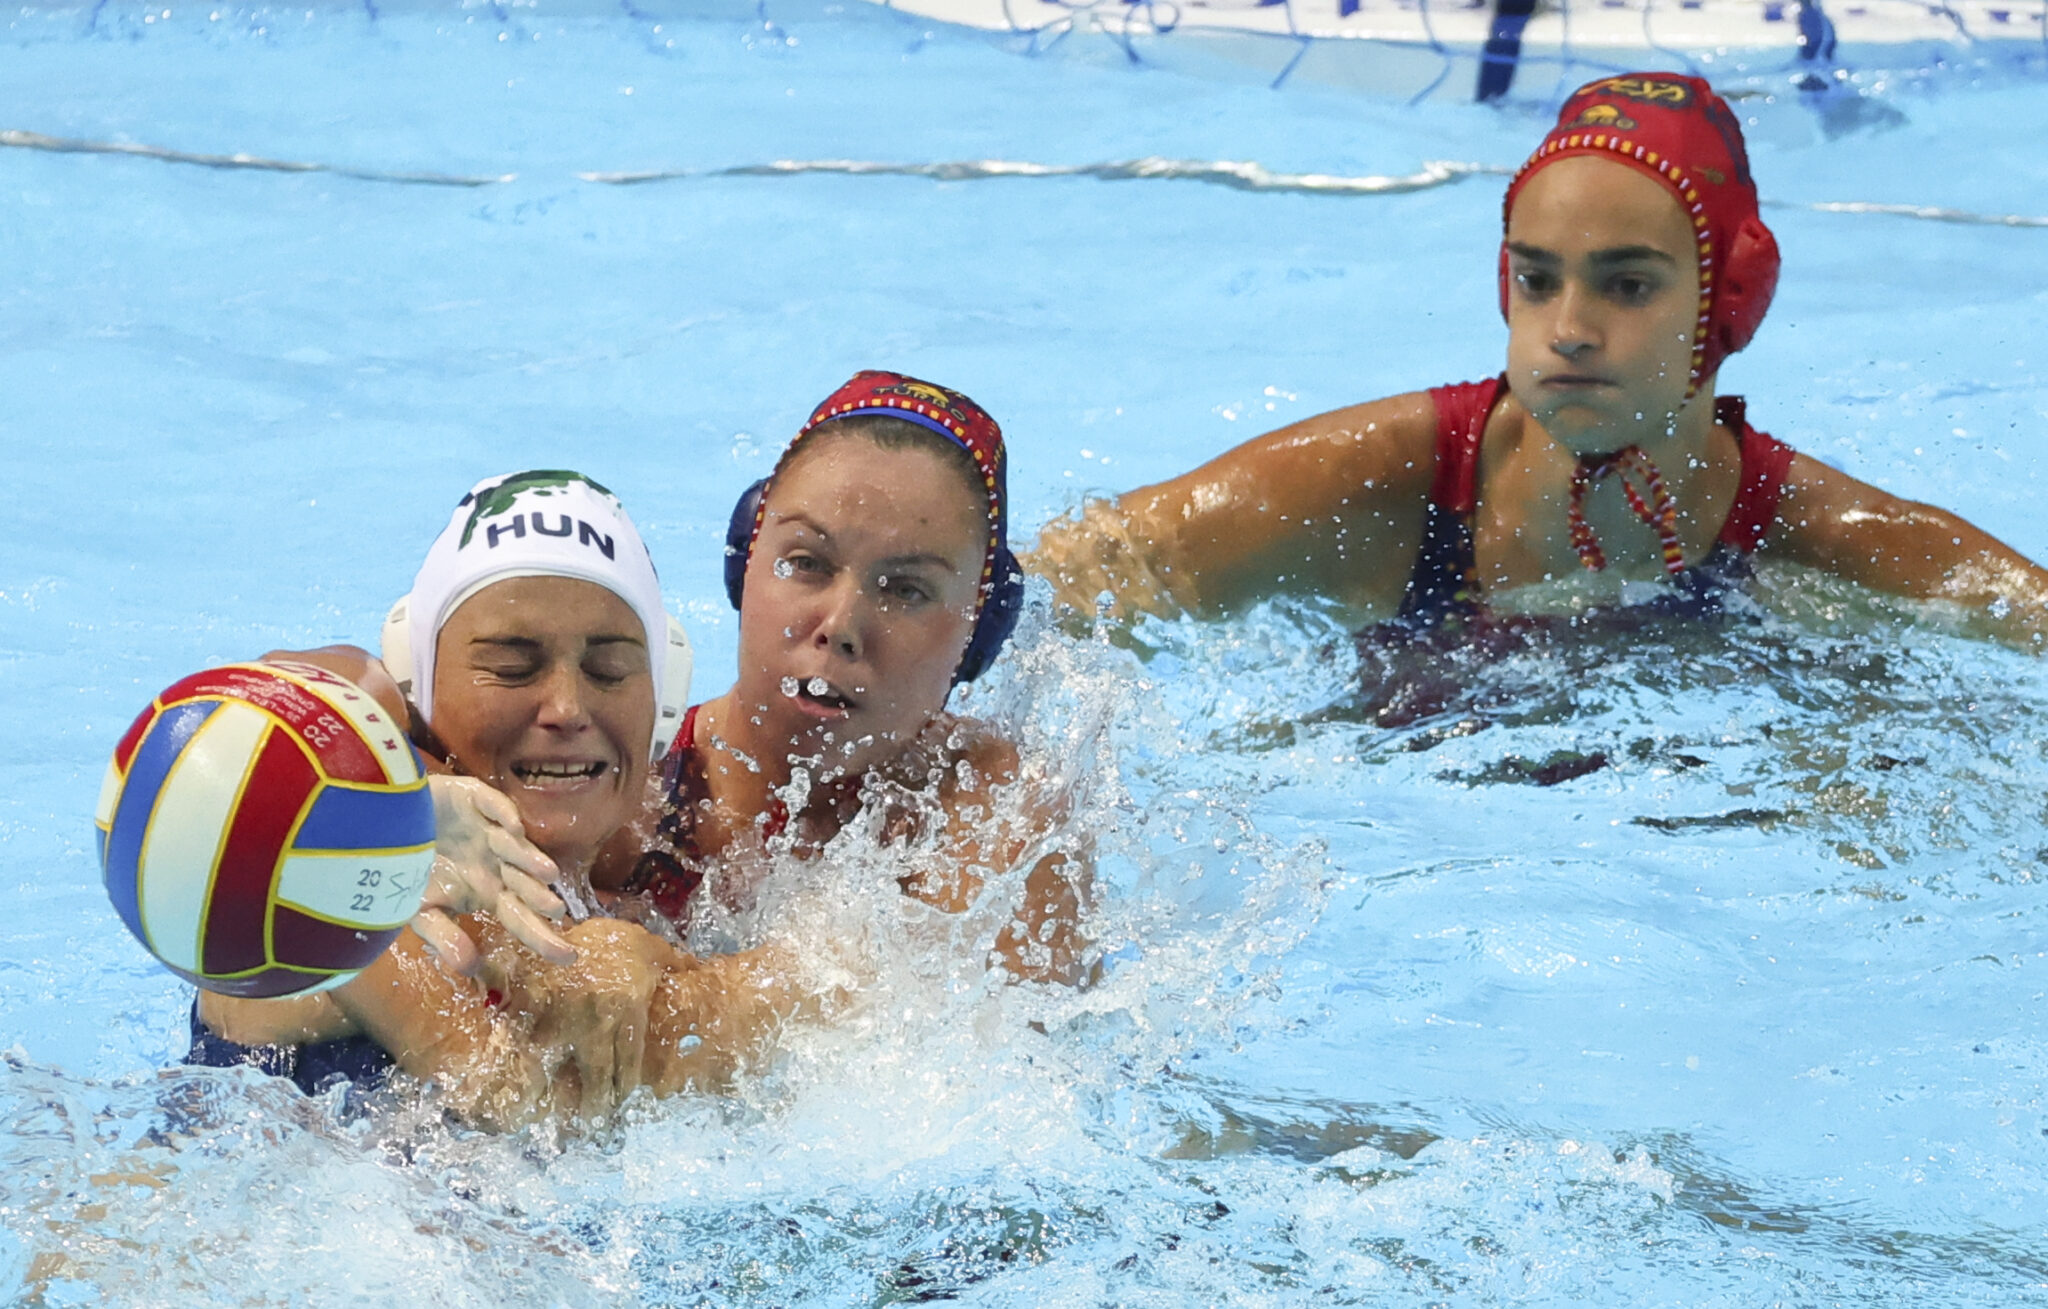 Women's Water Polo: Hungary Misses Euros Semifinals for 3rd Time in 19  Editions